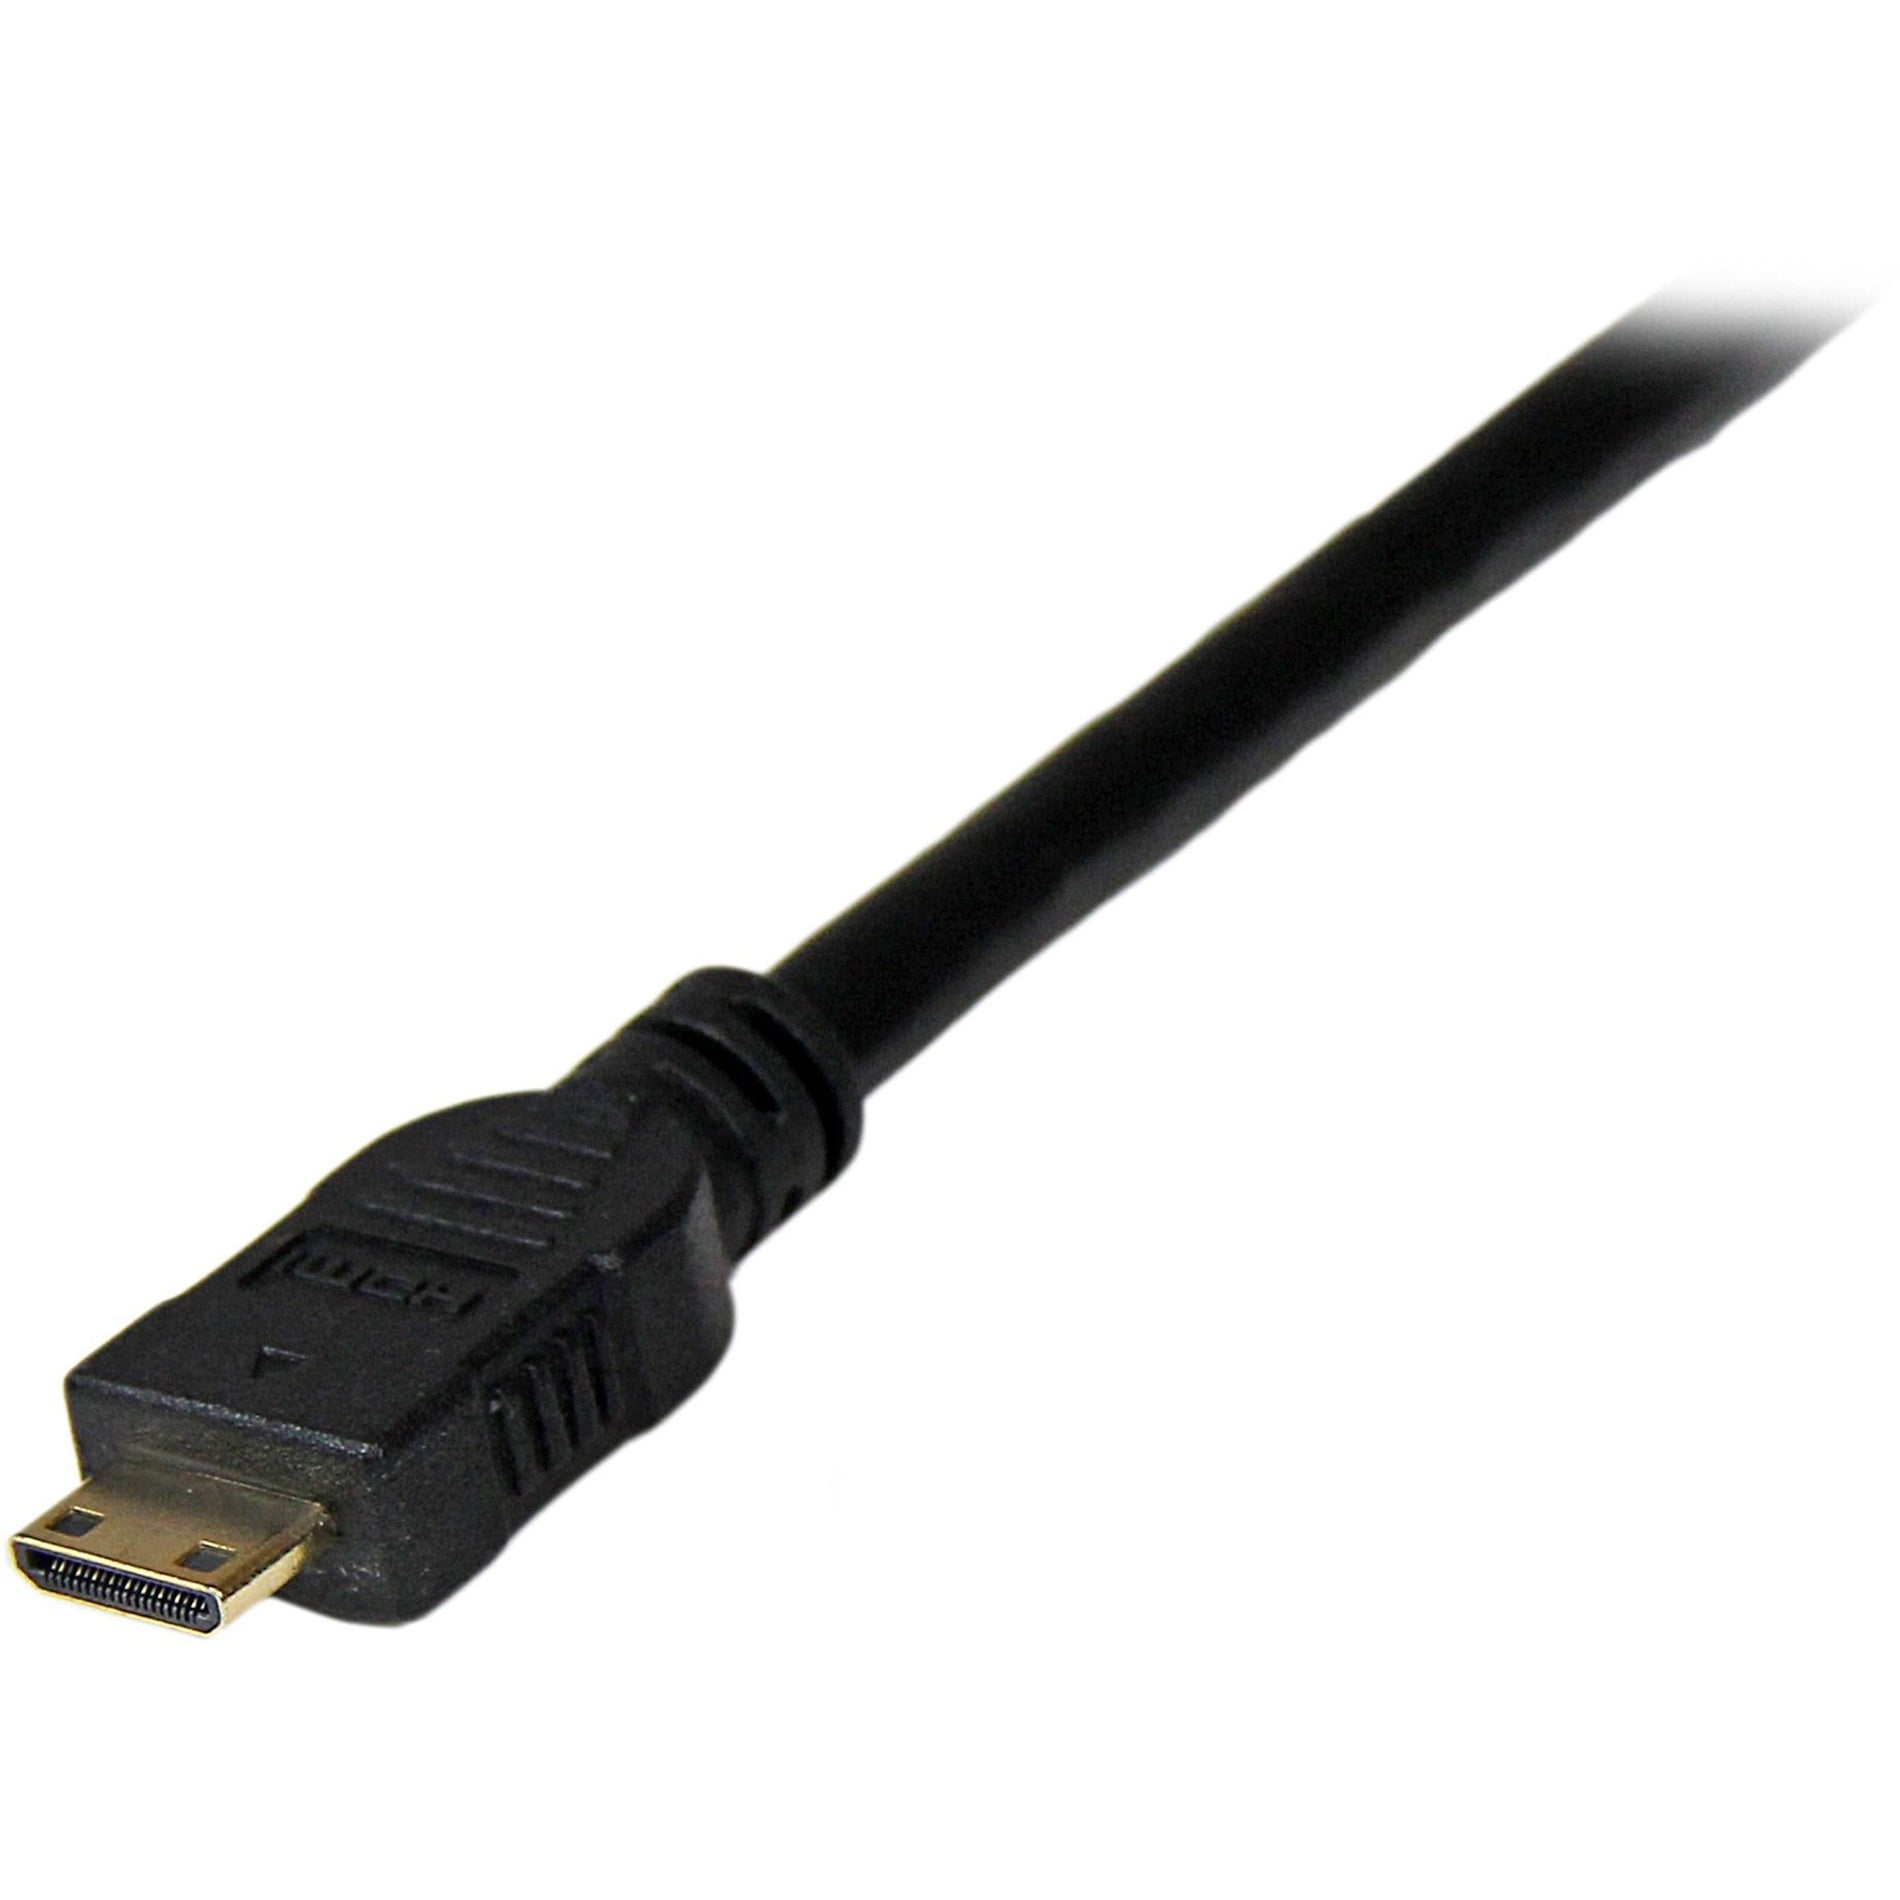 StarTech.com HDCDVIMM1M 1m Mini HDMI to DVI-D Cable - M/M, Molded, Strain Relief, EMI Protection, Damage Resistant, Fray Resistant, Active, 3.28 ft, Gold Plated Connectors, 1920 x 1200 Supported Resolution